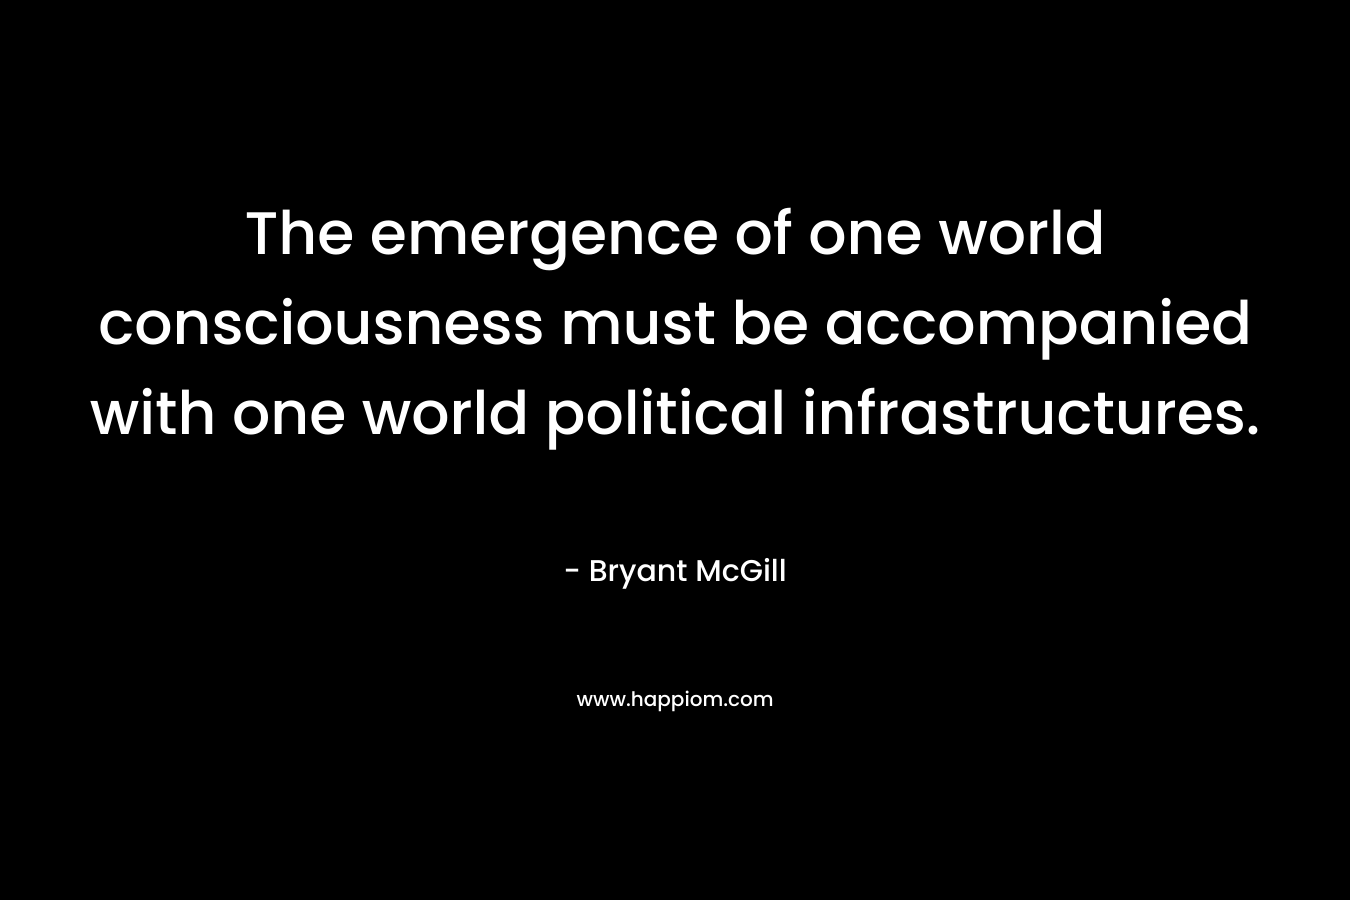 The emergence of one world consciousness must be accompanied with one world political infrastructures.